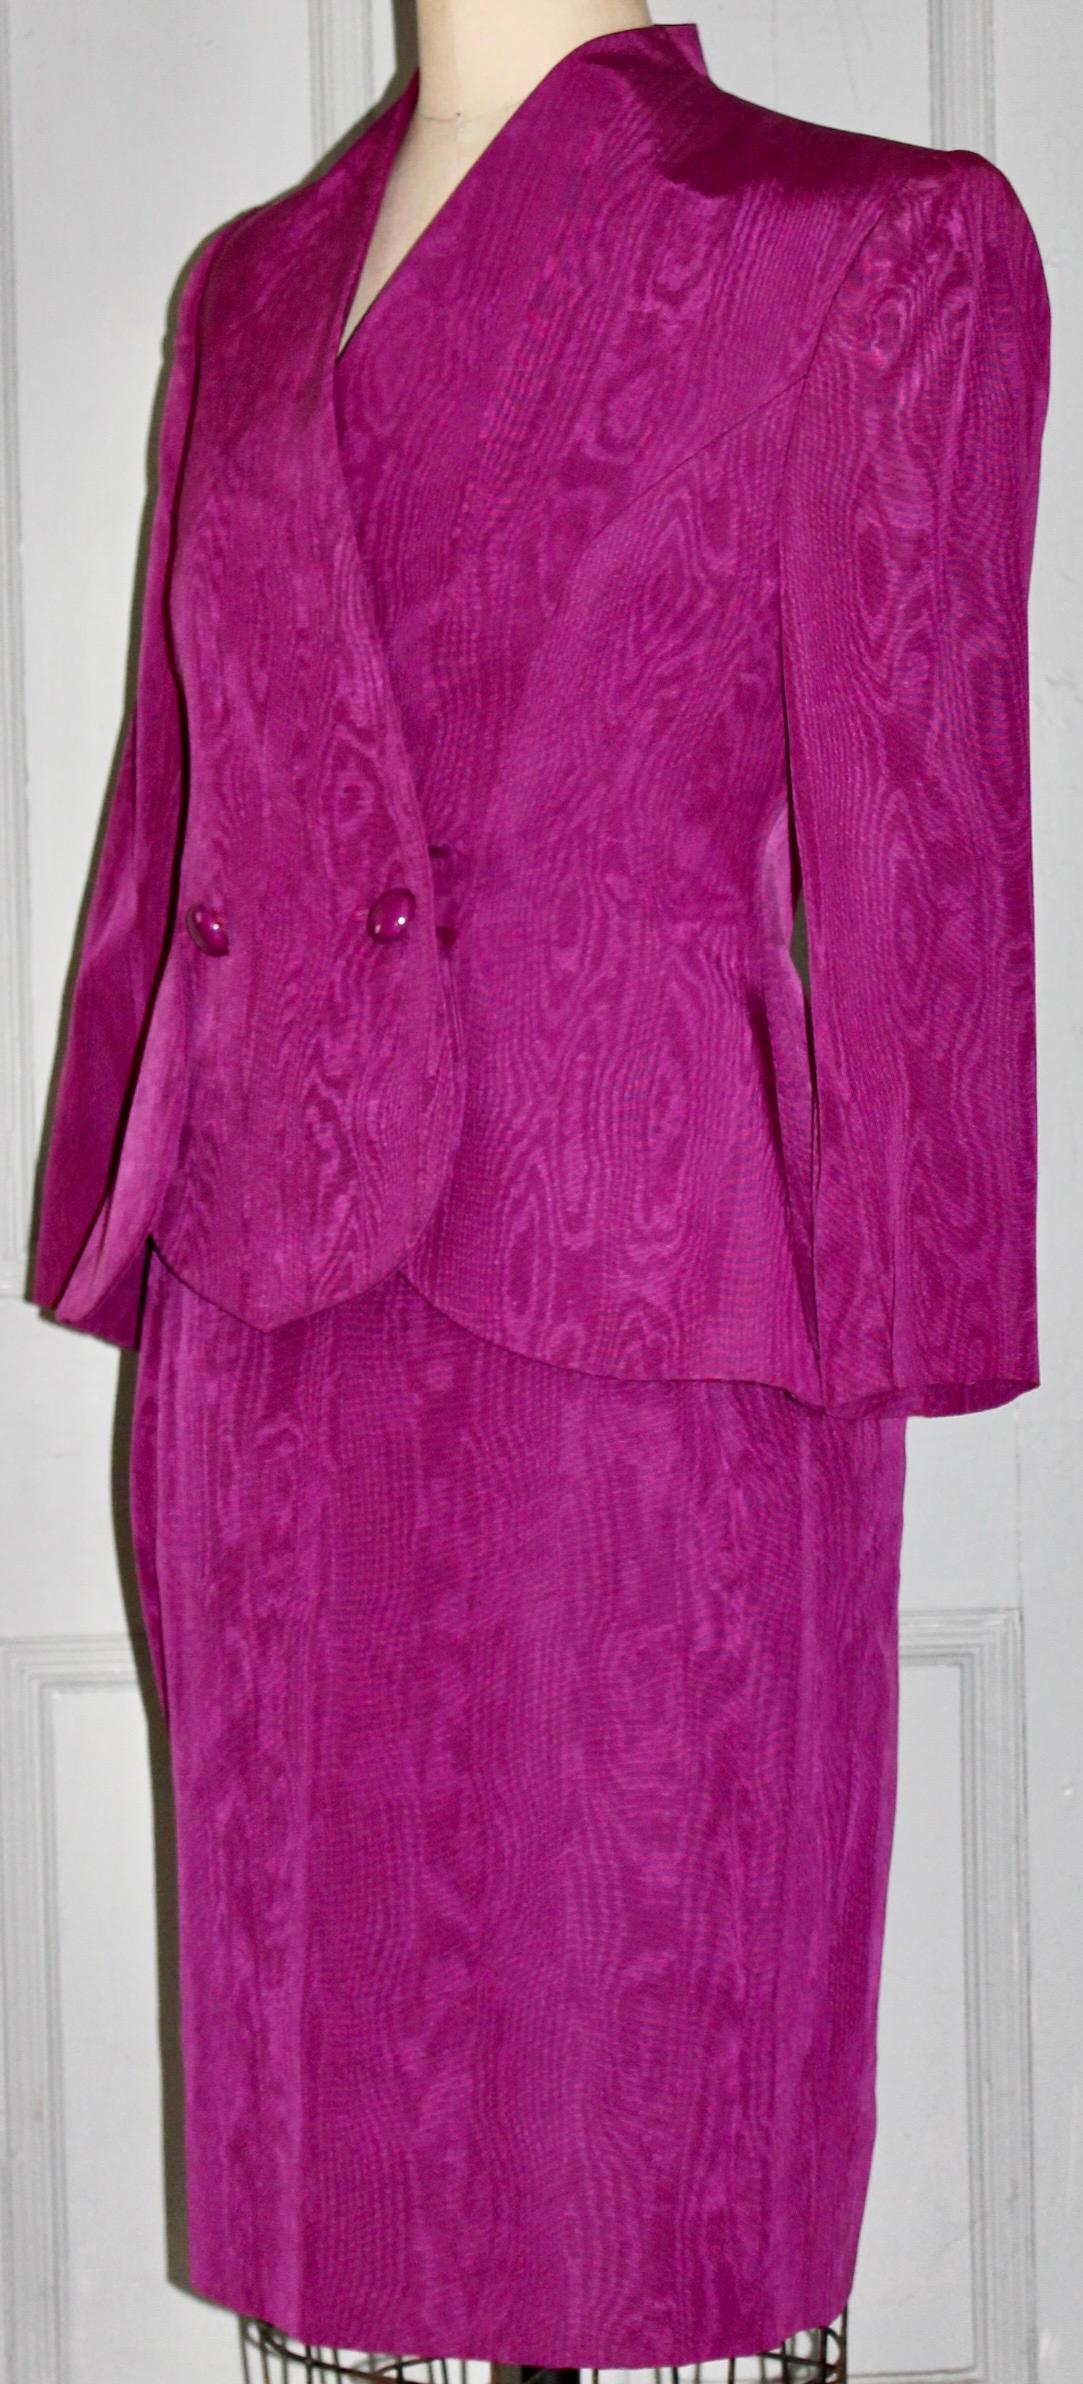 Vintage Lanvin 1980's Magenta Moire Suit (Jacket and Skirt) in the style of YSL. A size 42, Cotton/Rayon and labeled: Lanvin Paris, Made in France. Length of skirt 24